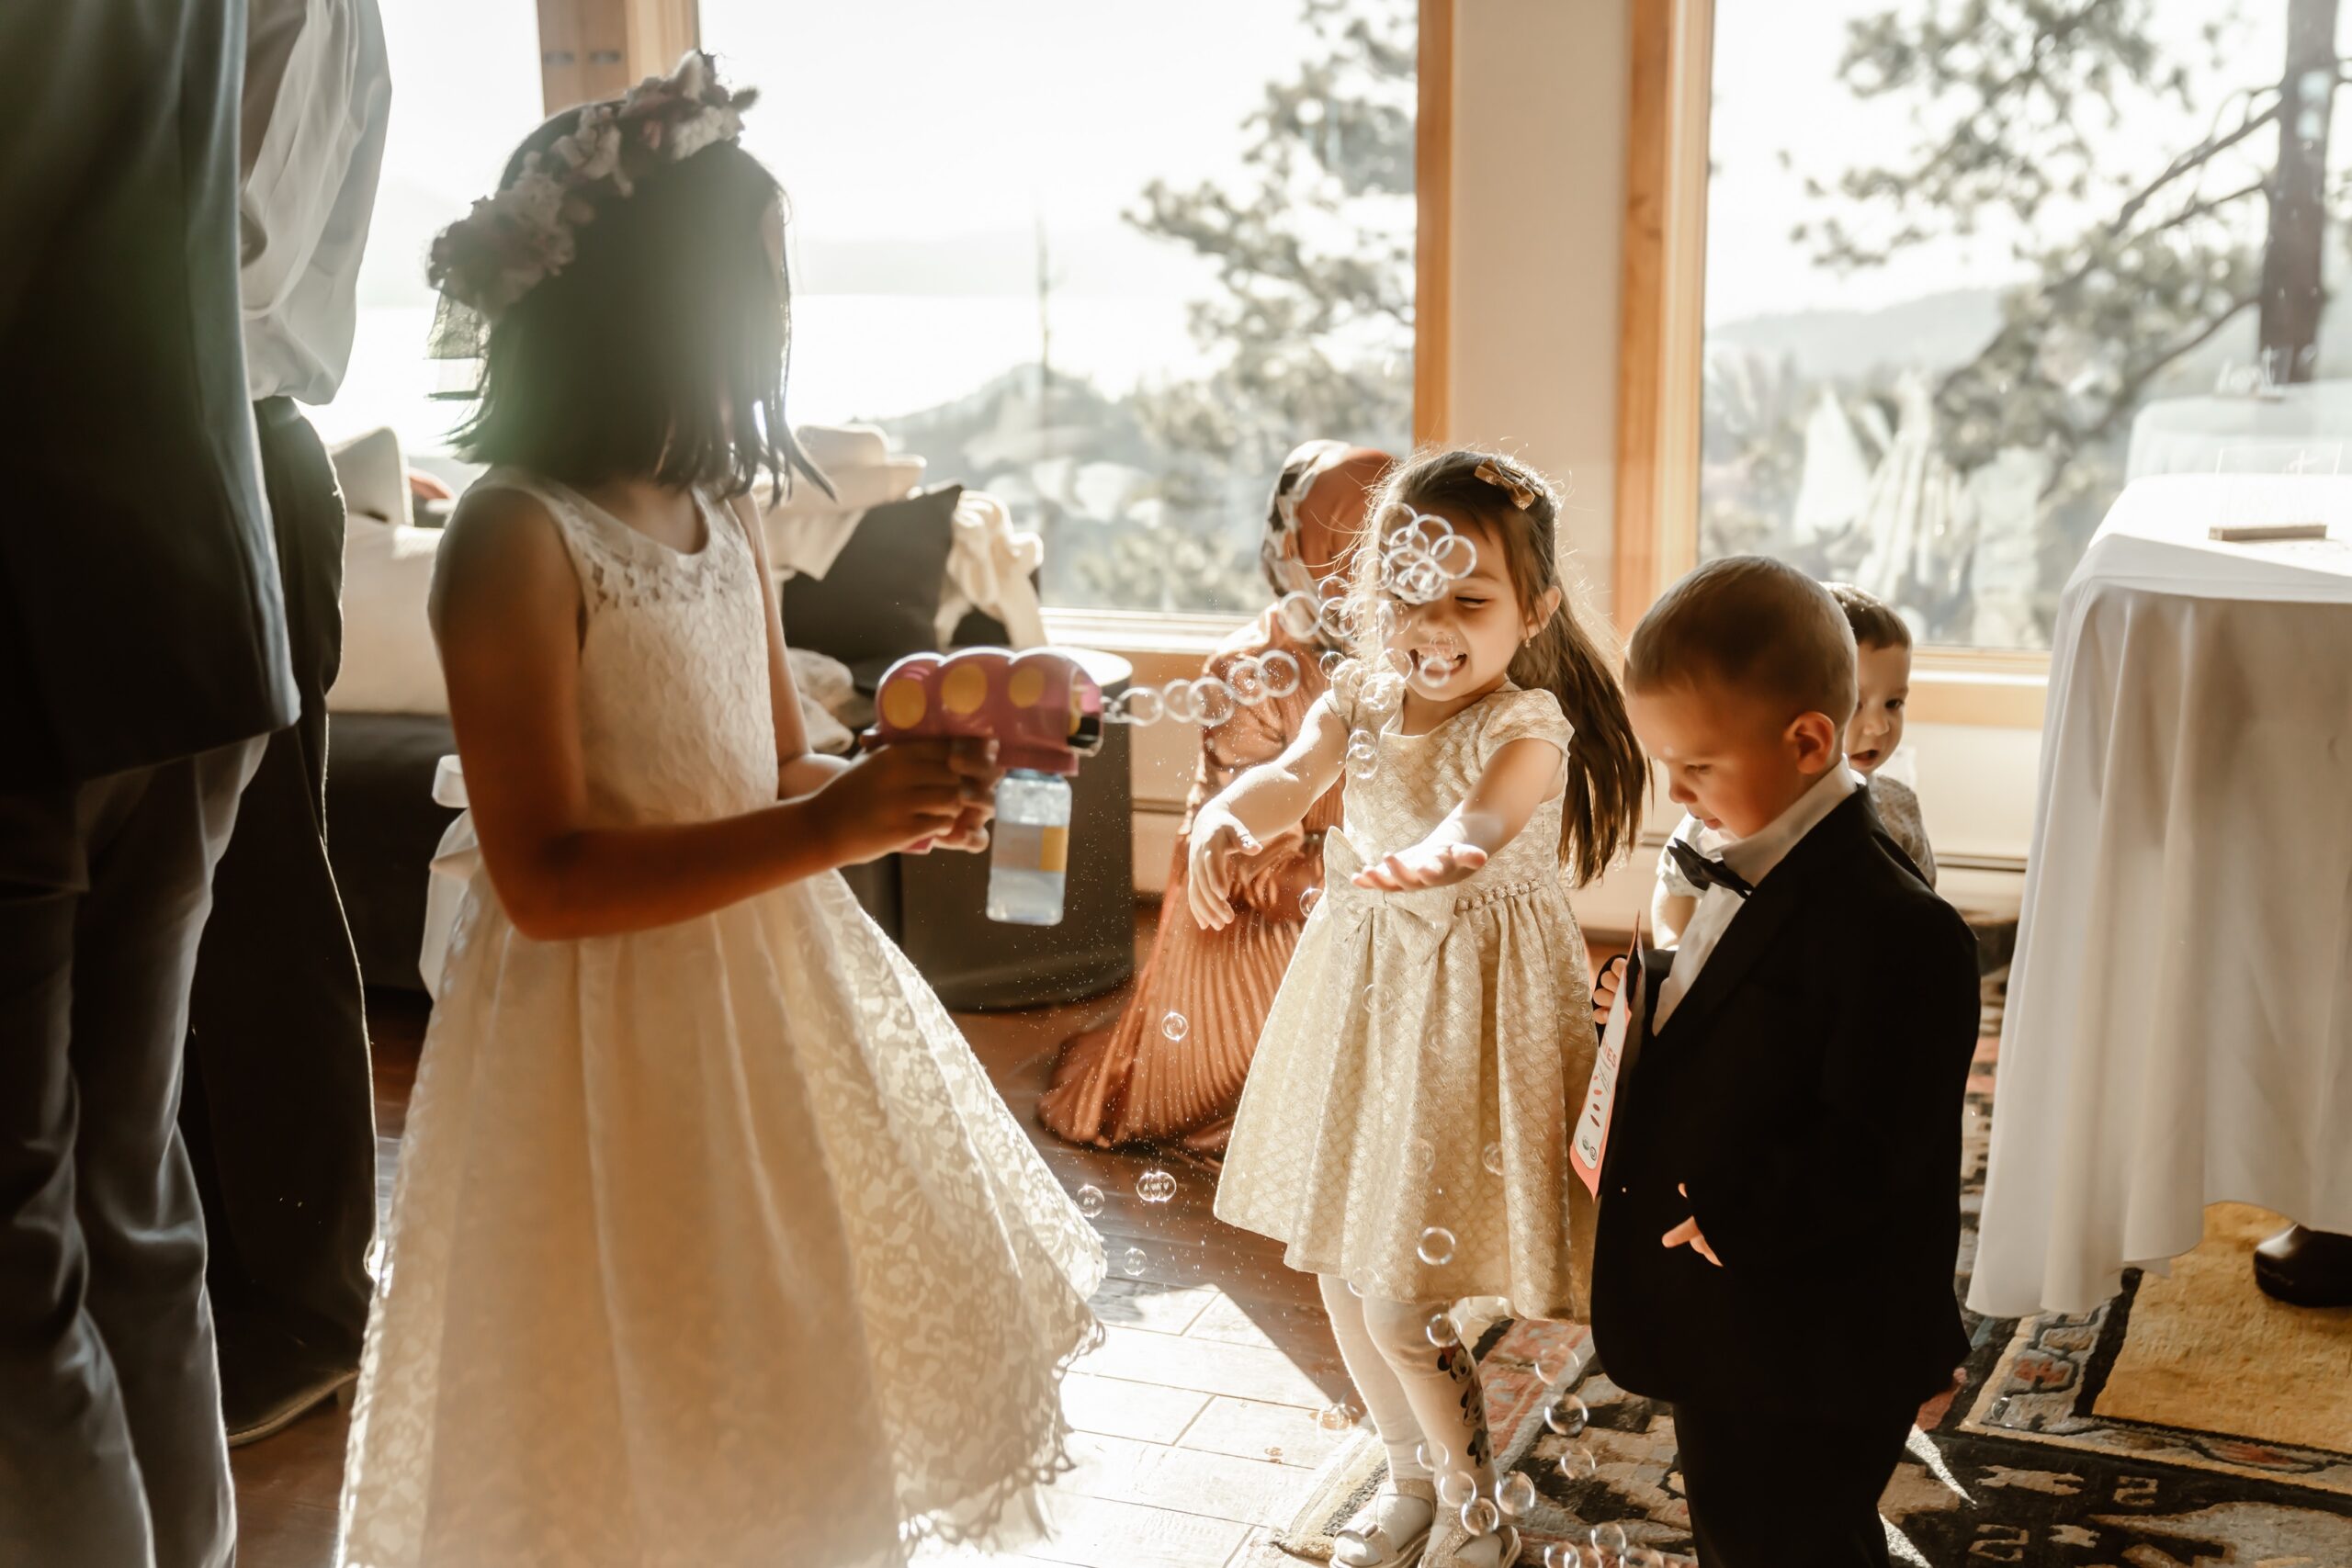 Flower girls and ring bearer play with bubbles at wedding